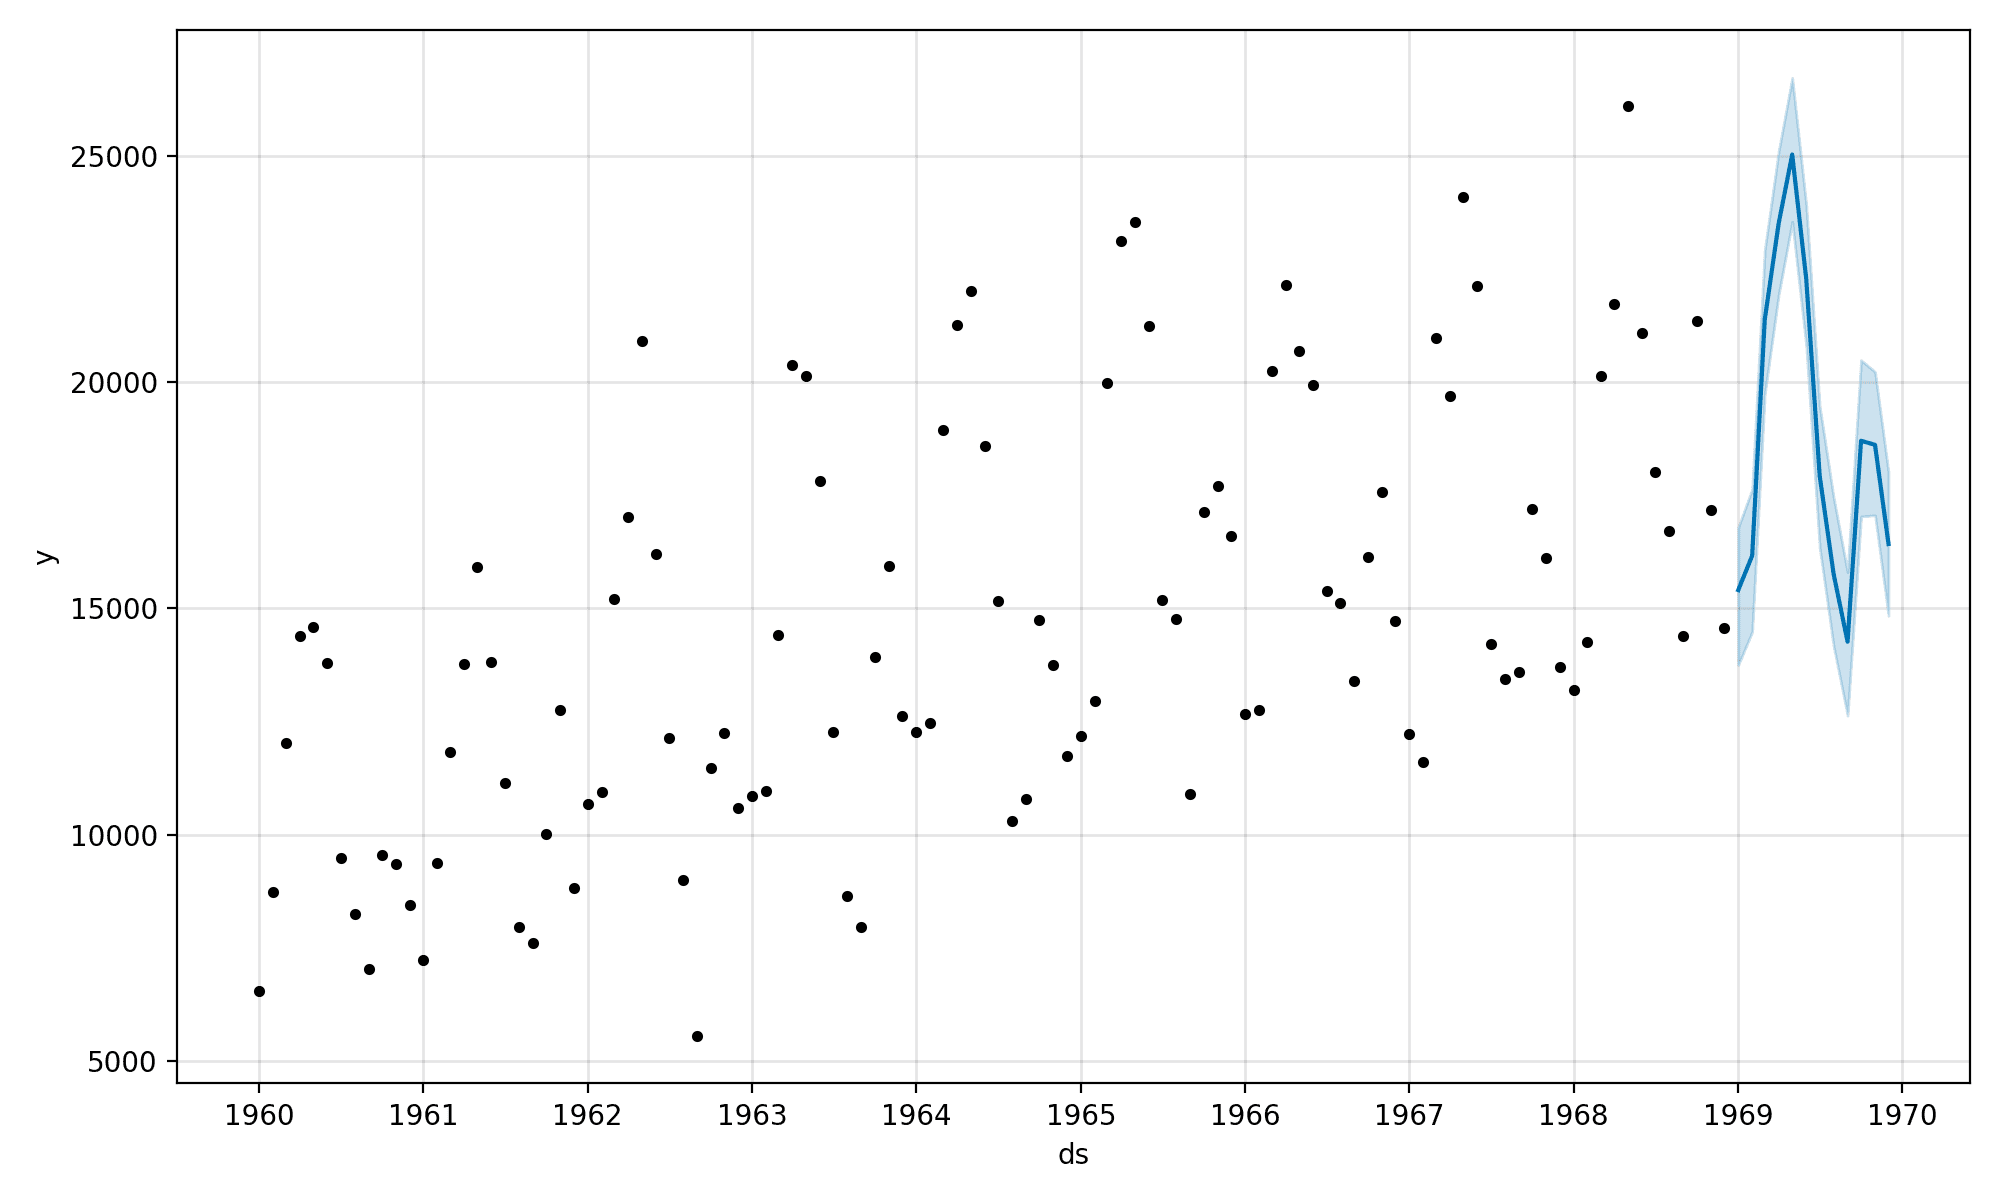 Plot of Time Series and Out-of-Sample Forecast With Prophet